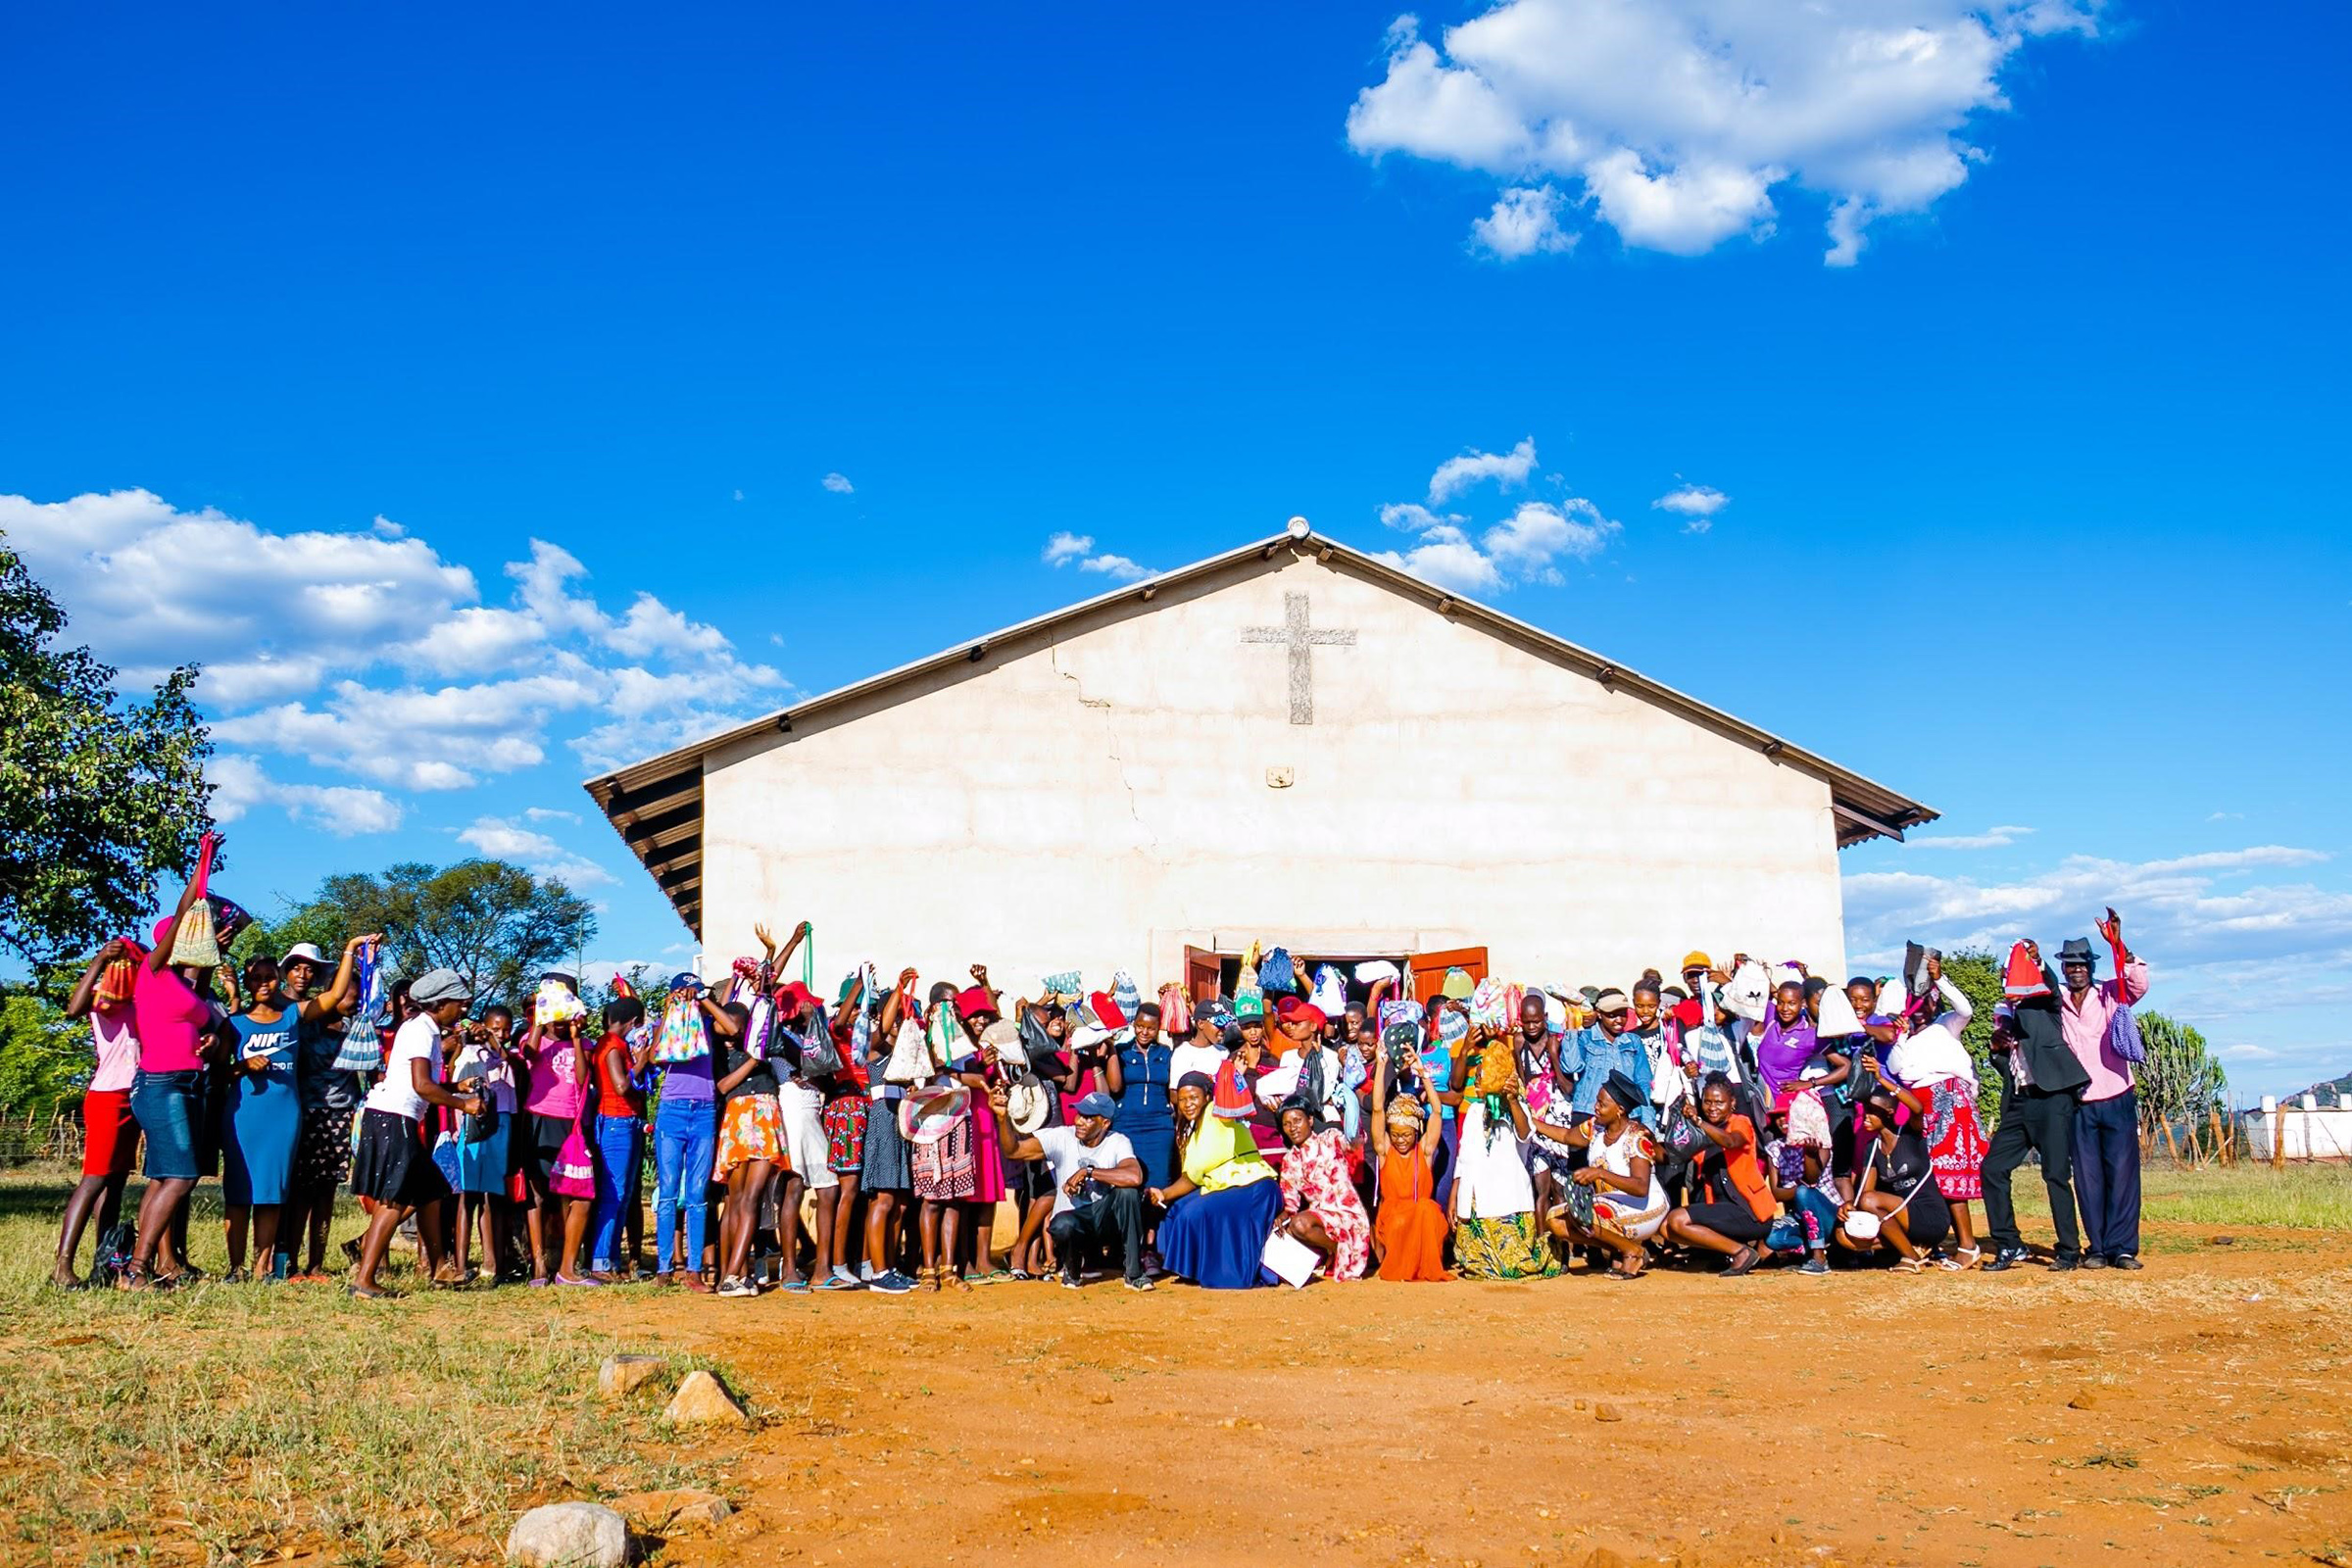 A large group of Mbizingwe people stand in front of a large white building holding up bags.